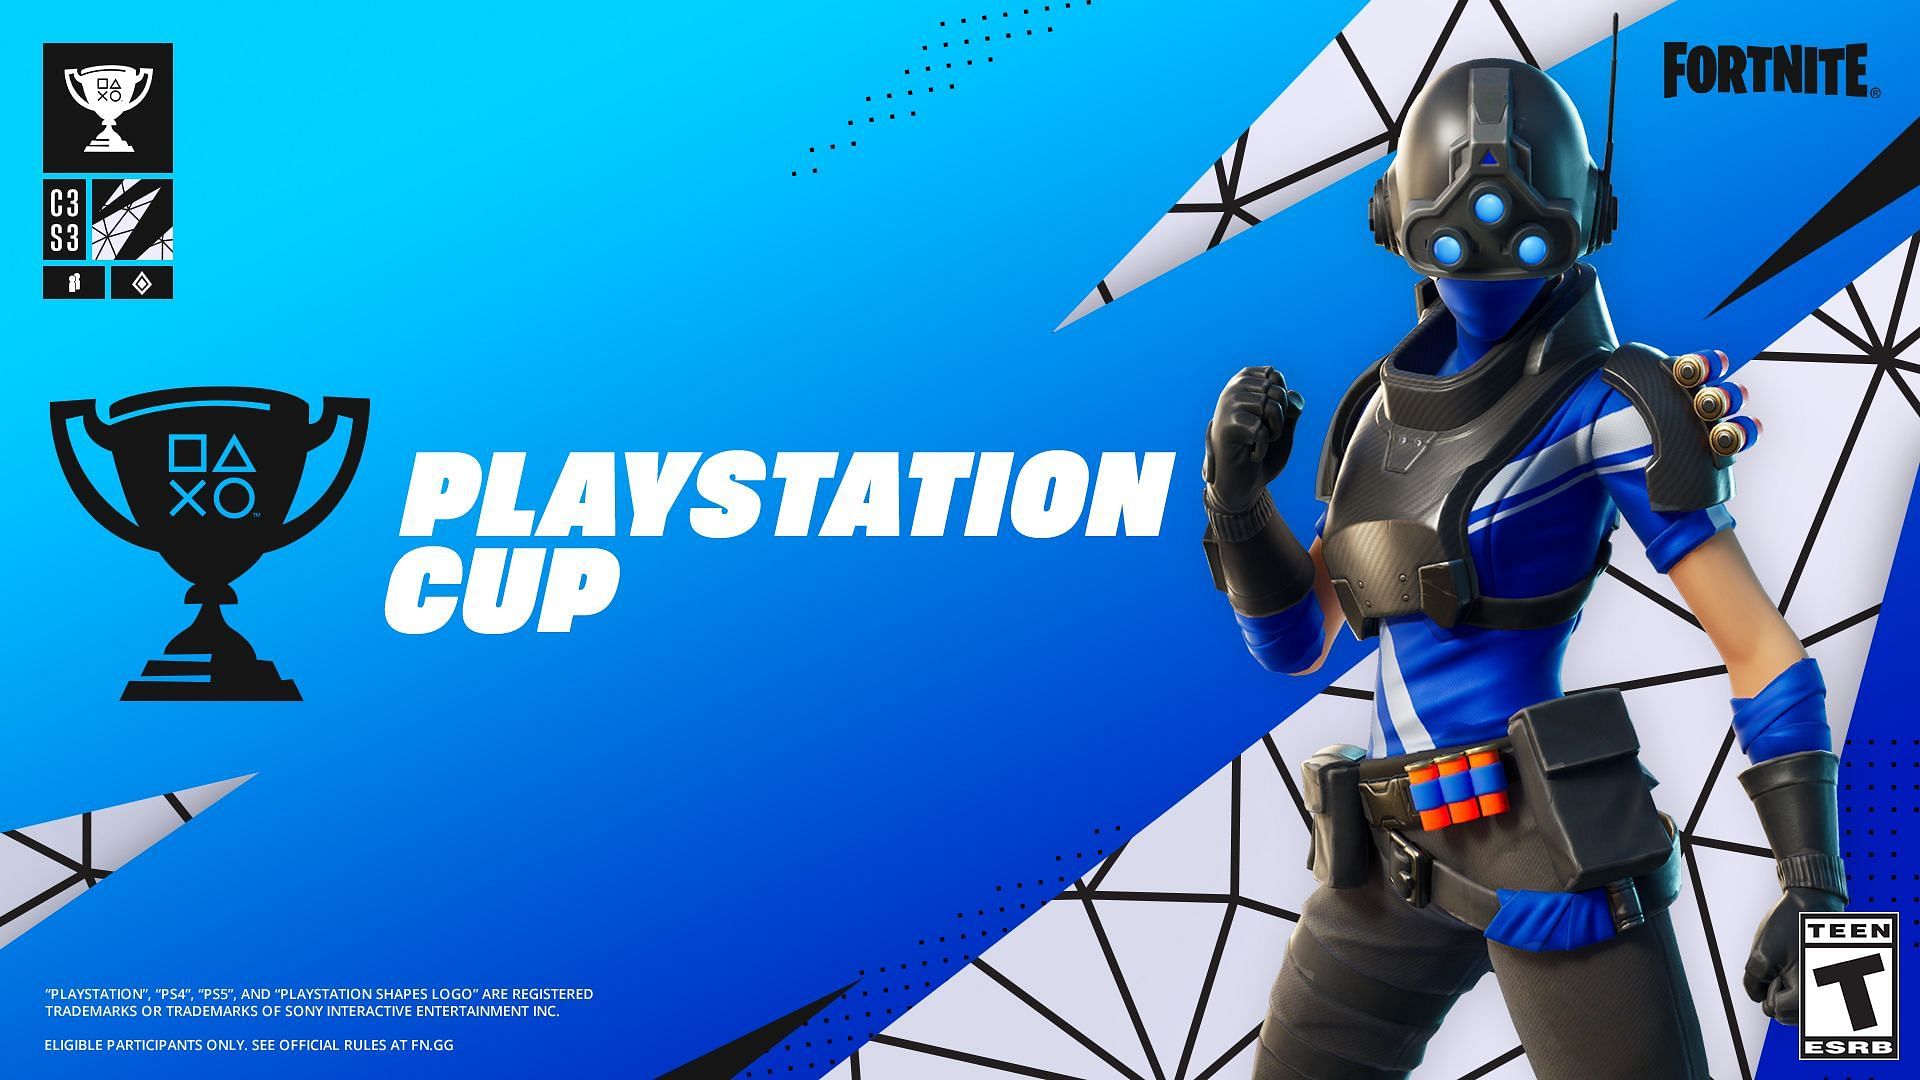 Join the Battle and Play in the #FreeFortnite Cup on August 23